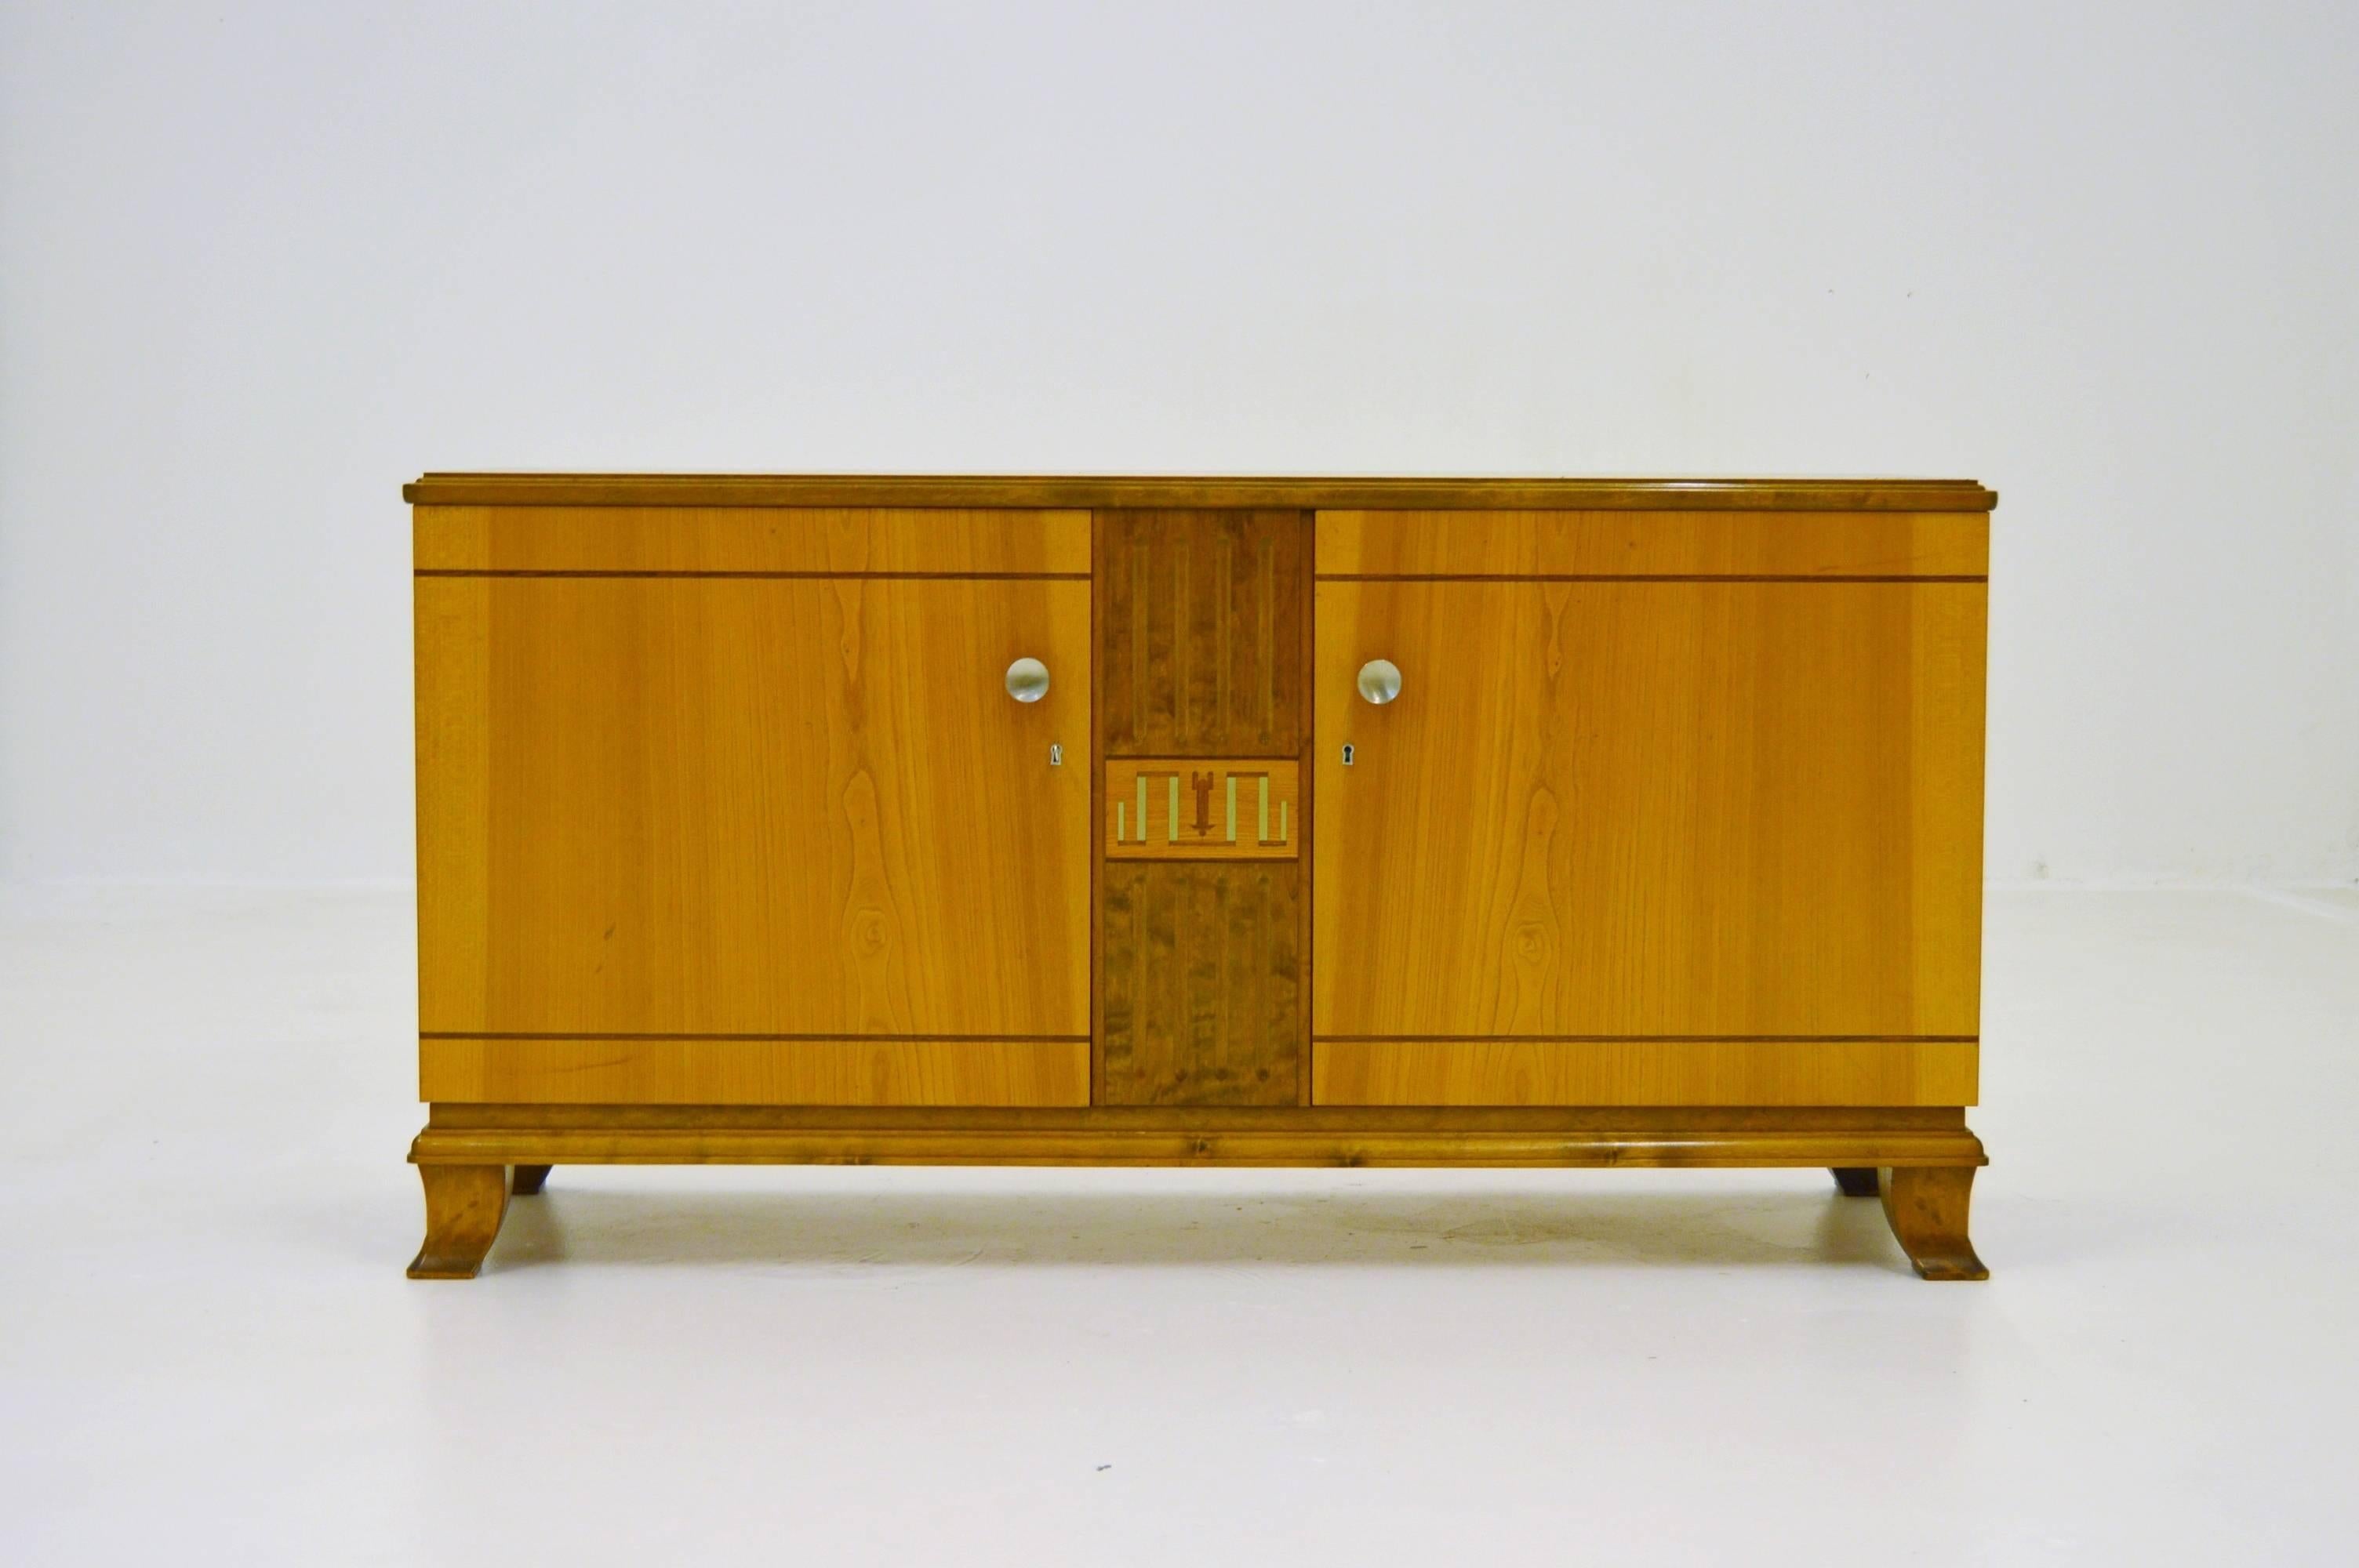 Very elegant Swedish sideboard from circa 1940s with intarsia of pewter. Wood base of elm and birch. See how good the handles match with metal intarsia.
Even the keyhole is designed and fits in style.